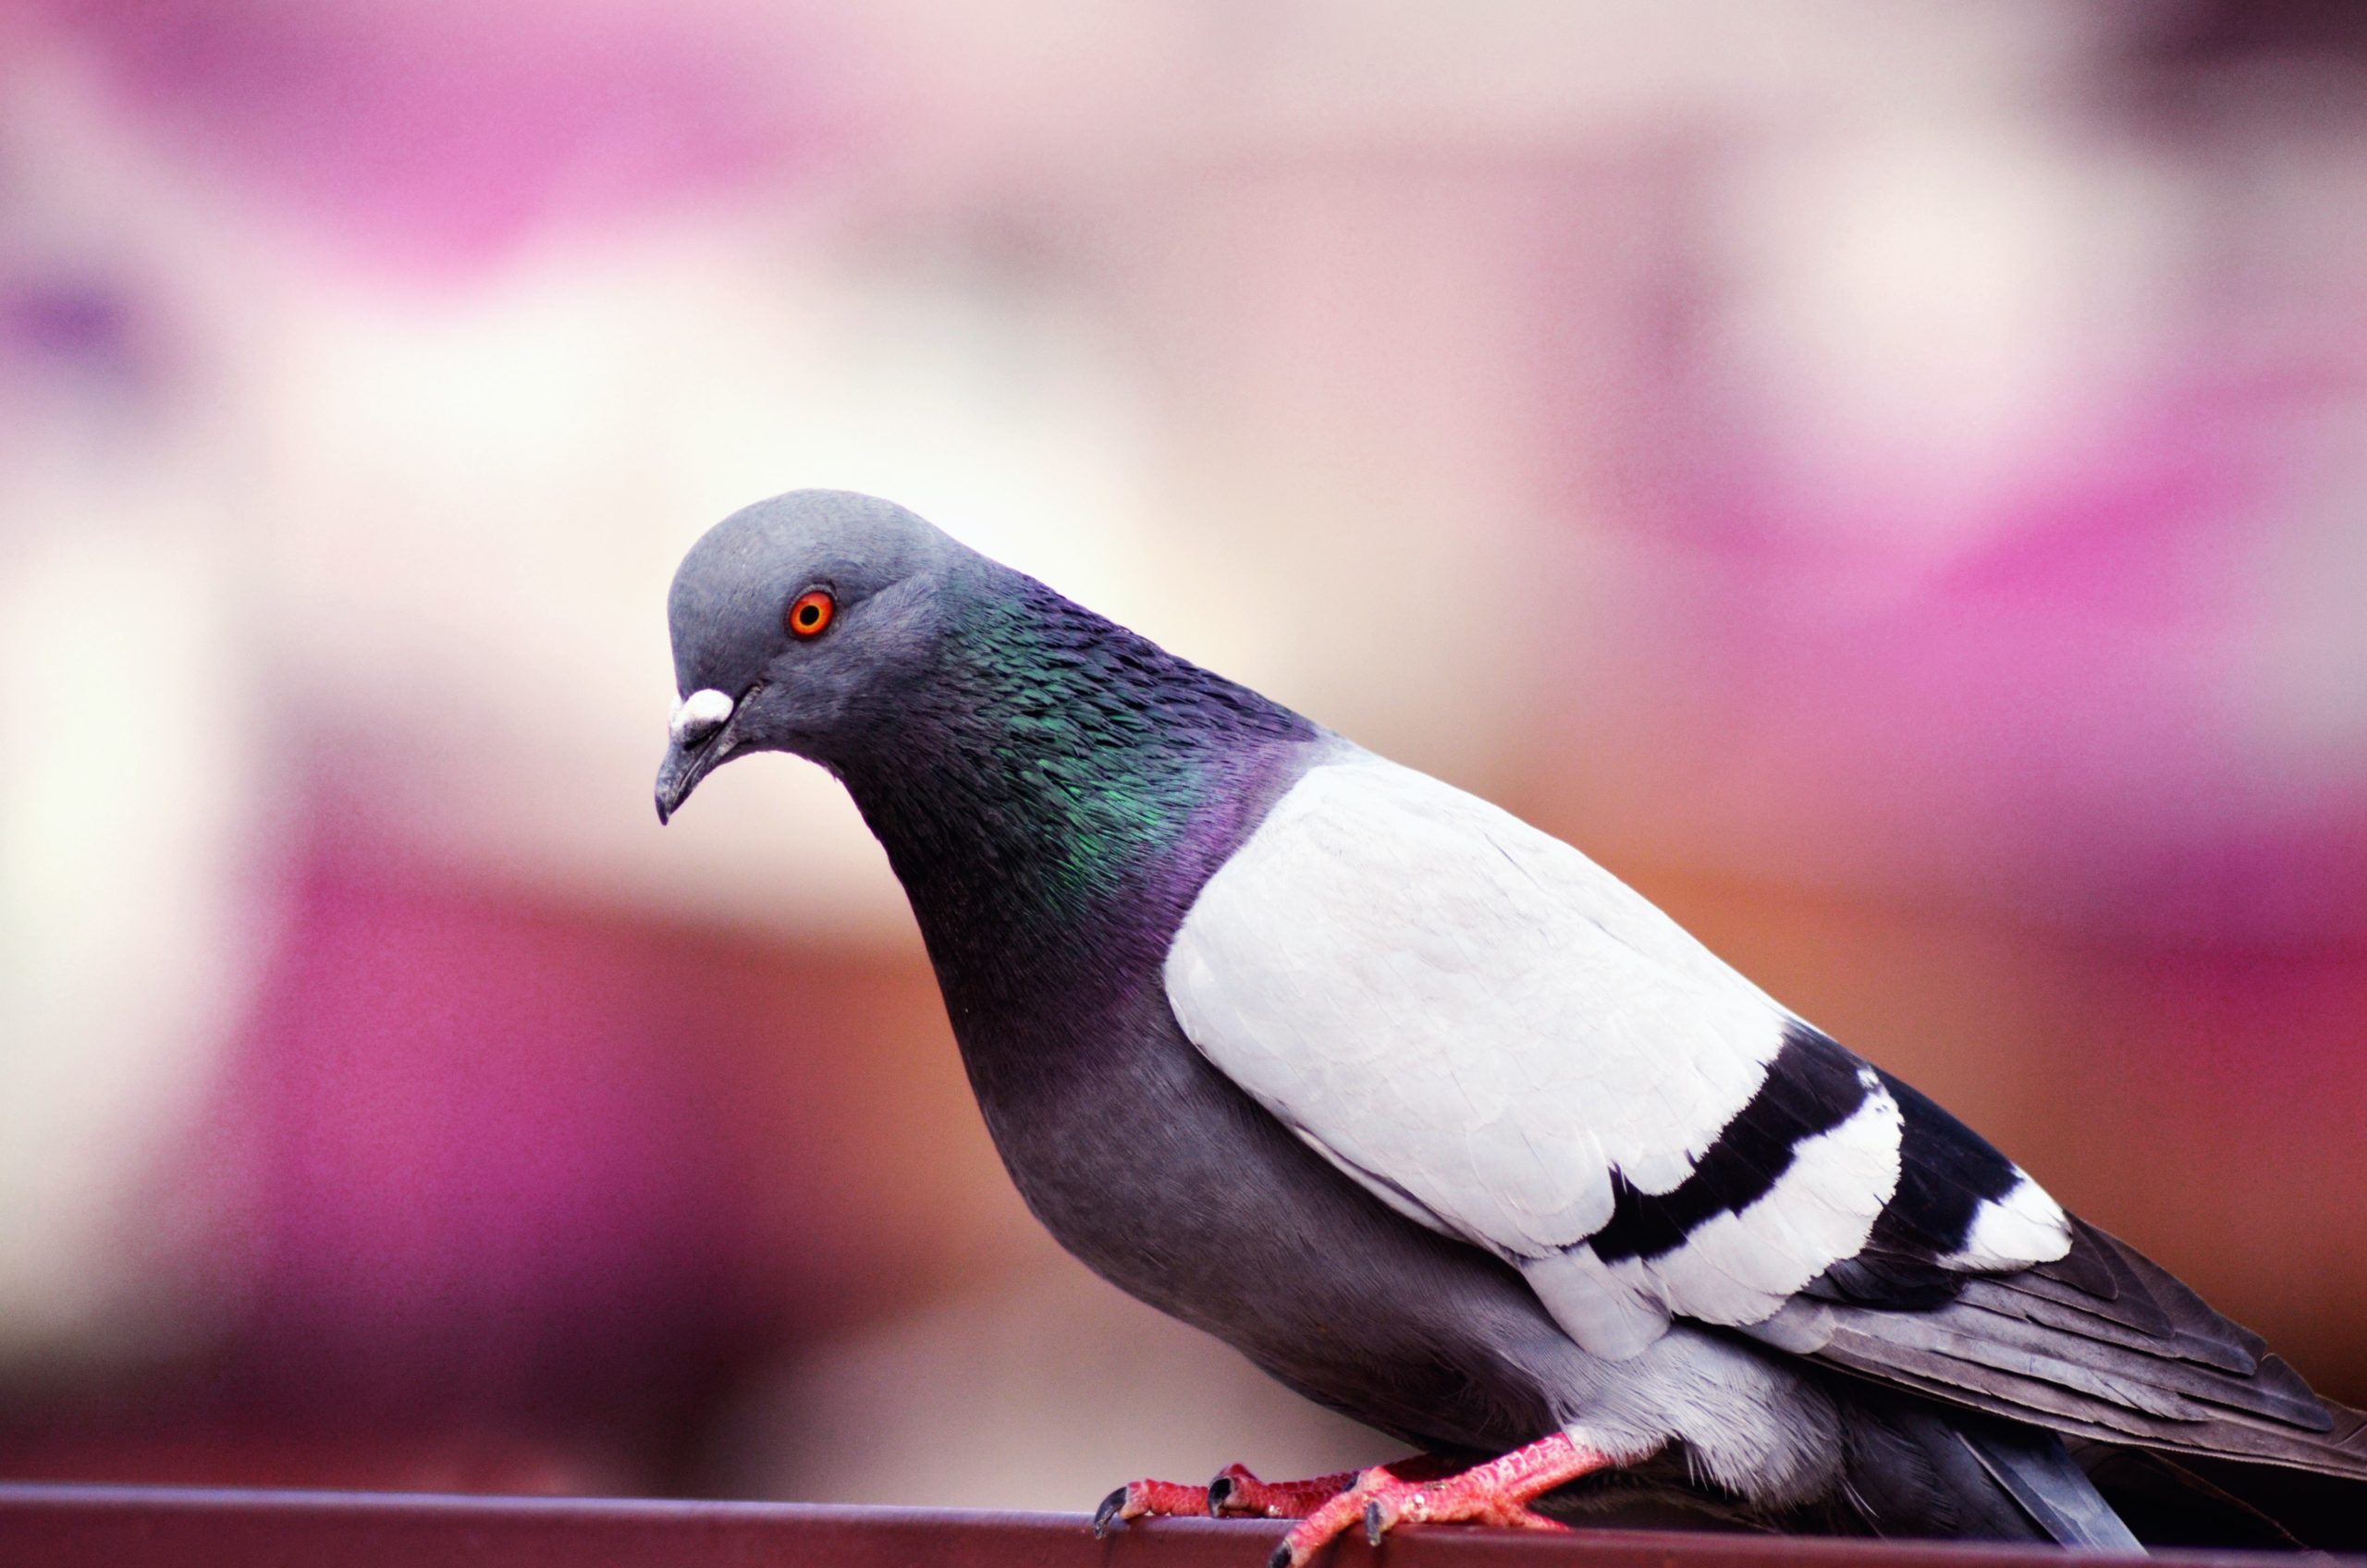 A photo of a grey and white pigeon perched on something